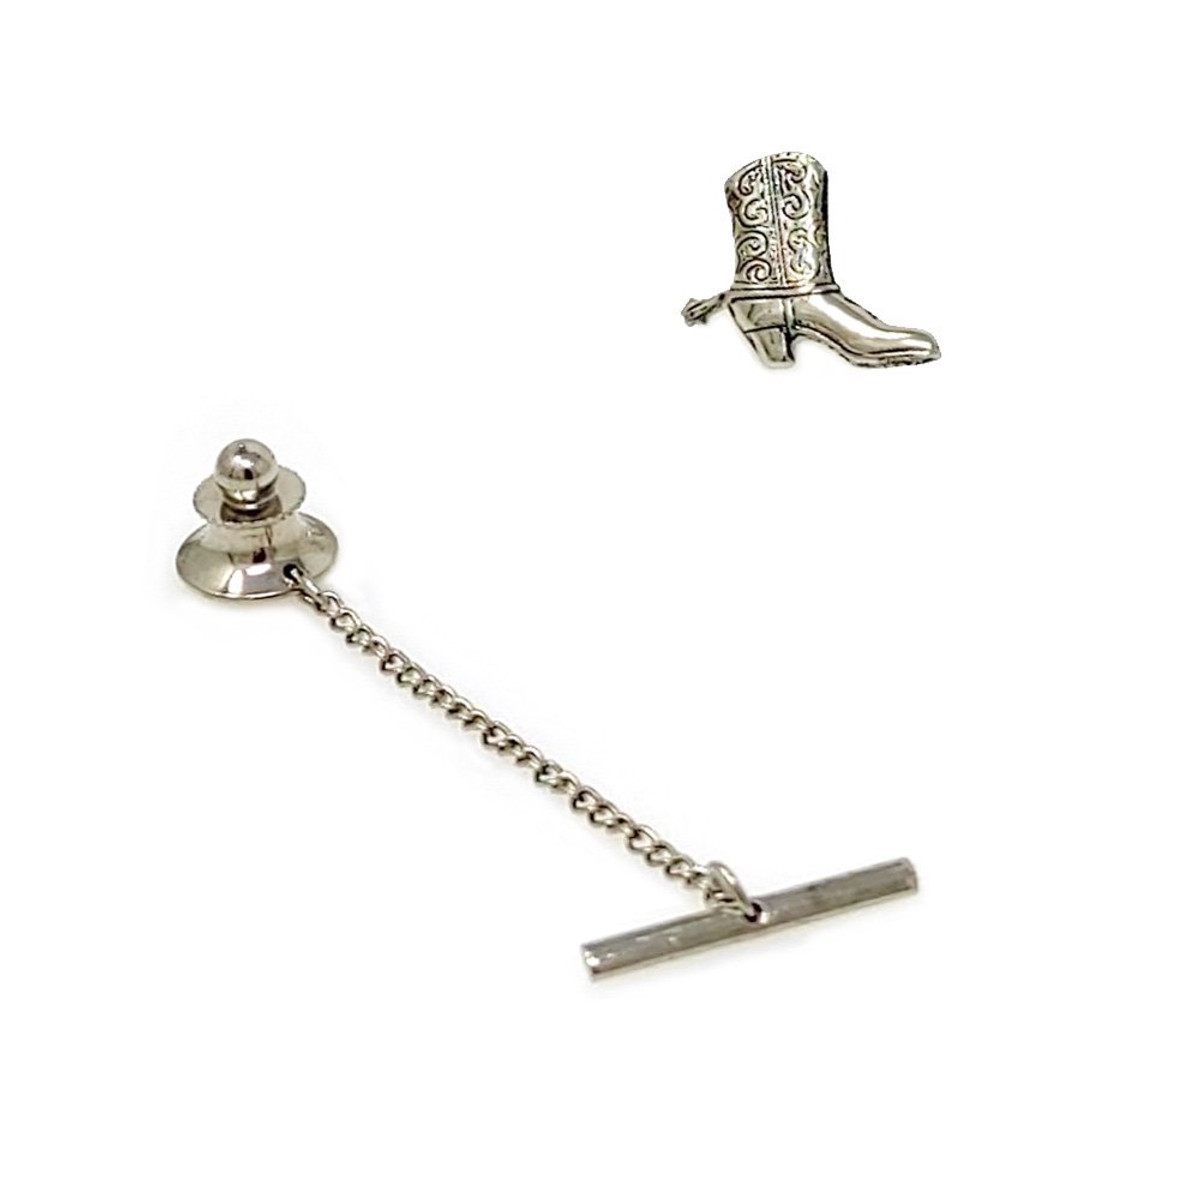 45 Colt Bullet Tie Tack with Chain - Men's Bullet Accessories